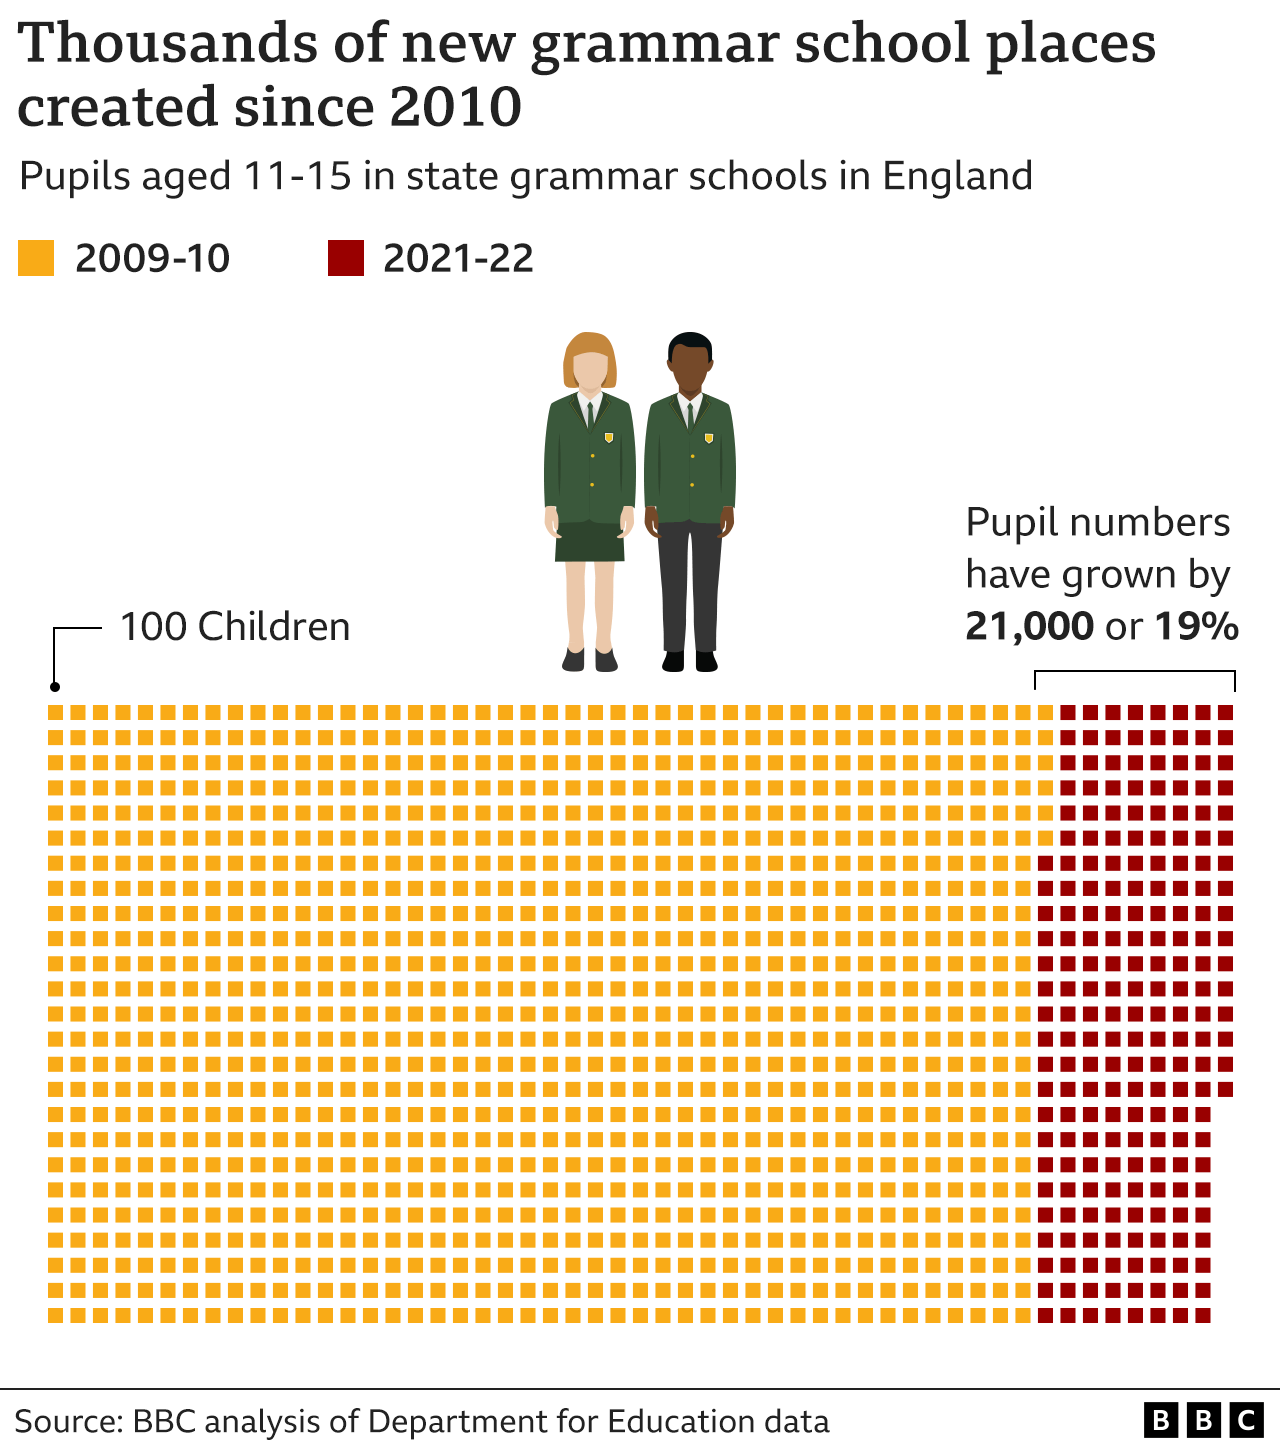 Graphic showing that thousands of new grammar school places have been created since 2010